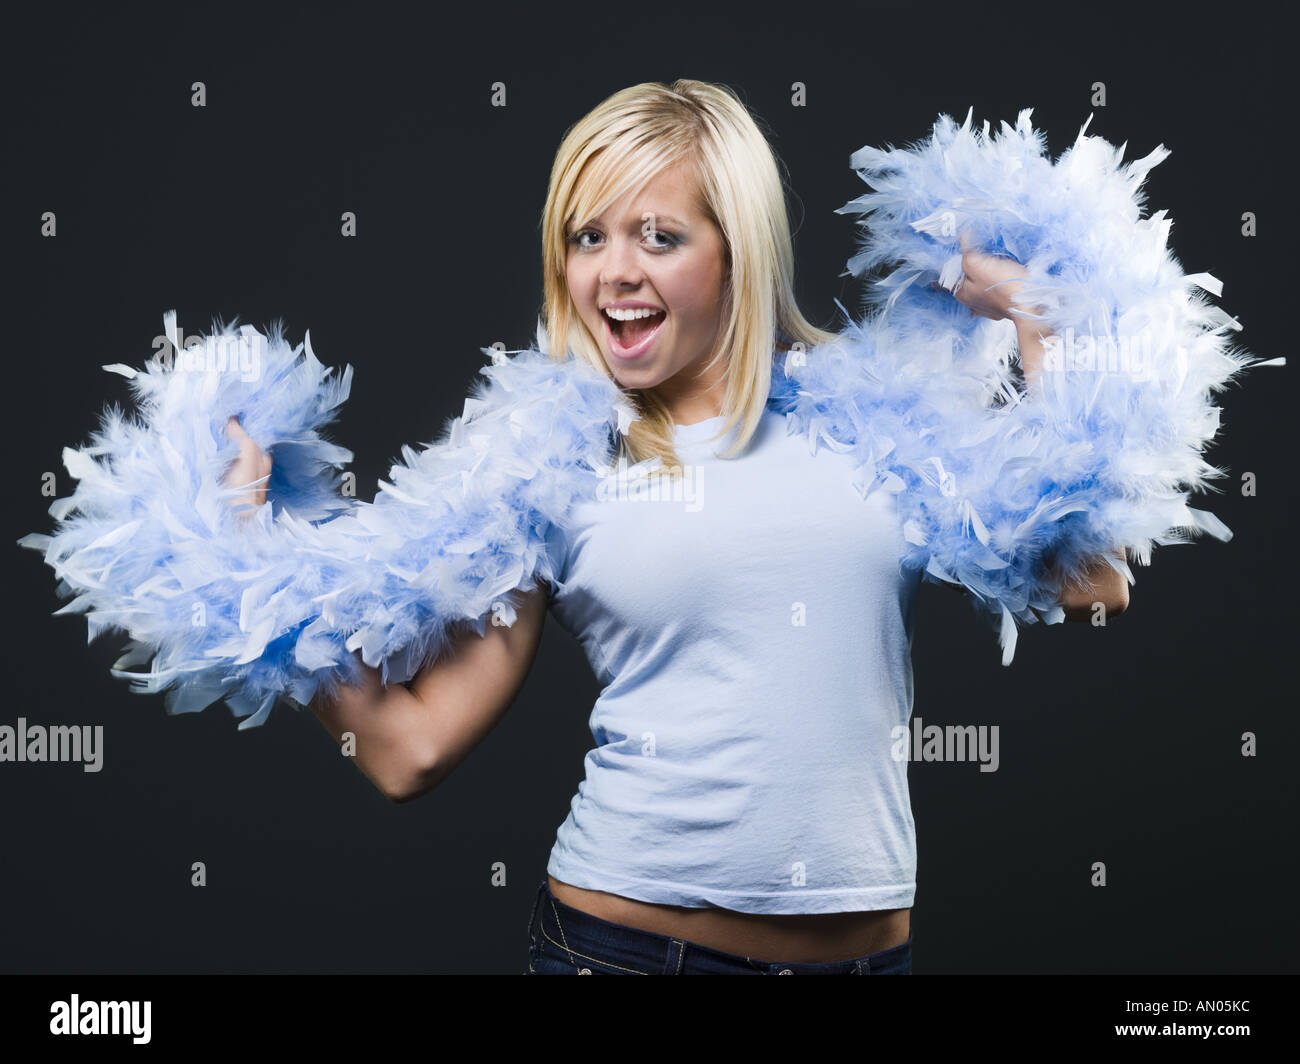 How would one go about rigging a feather boa around her neck? : r